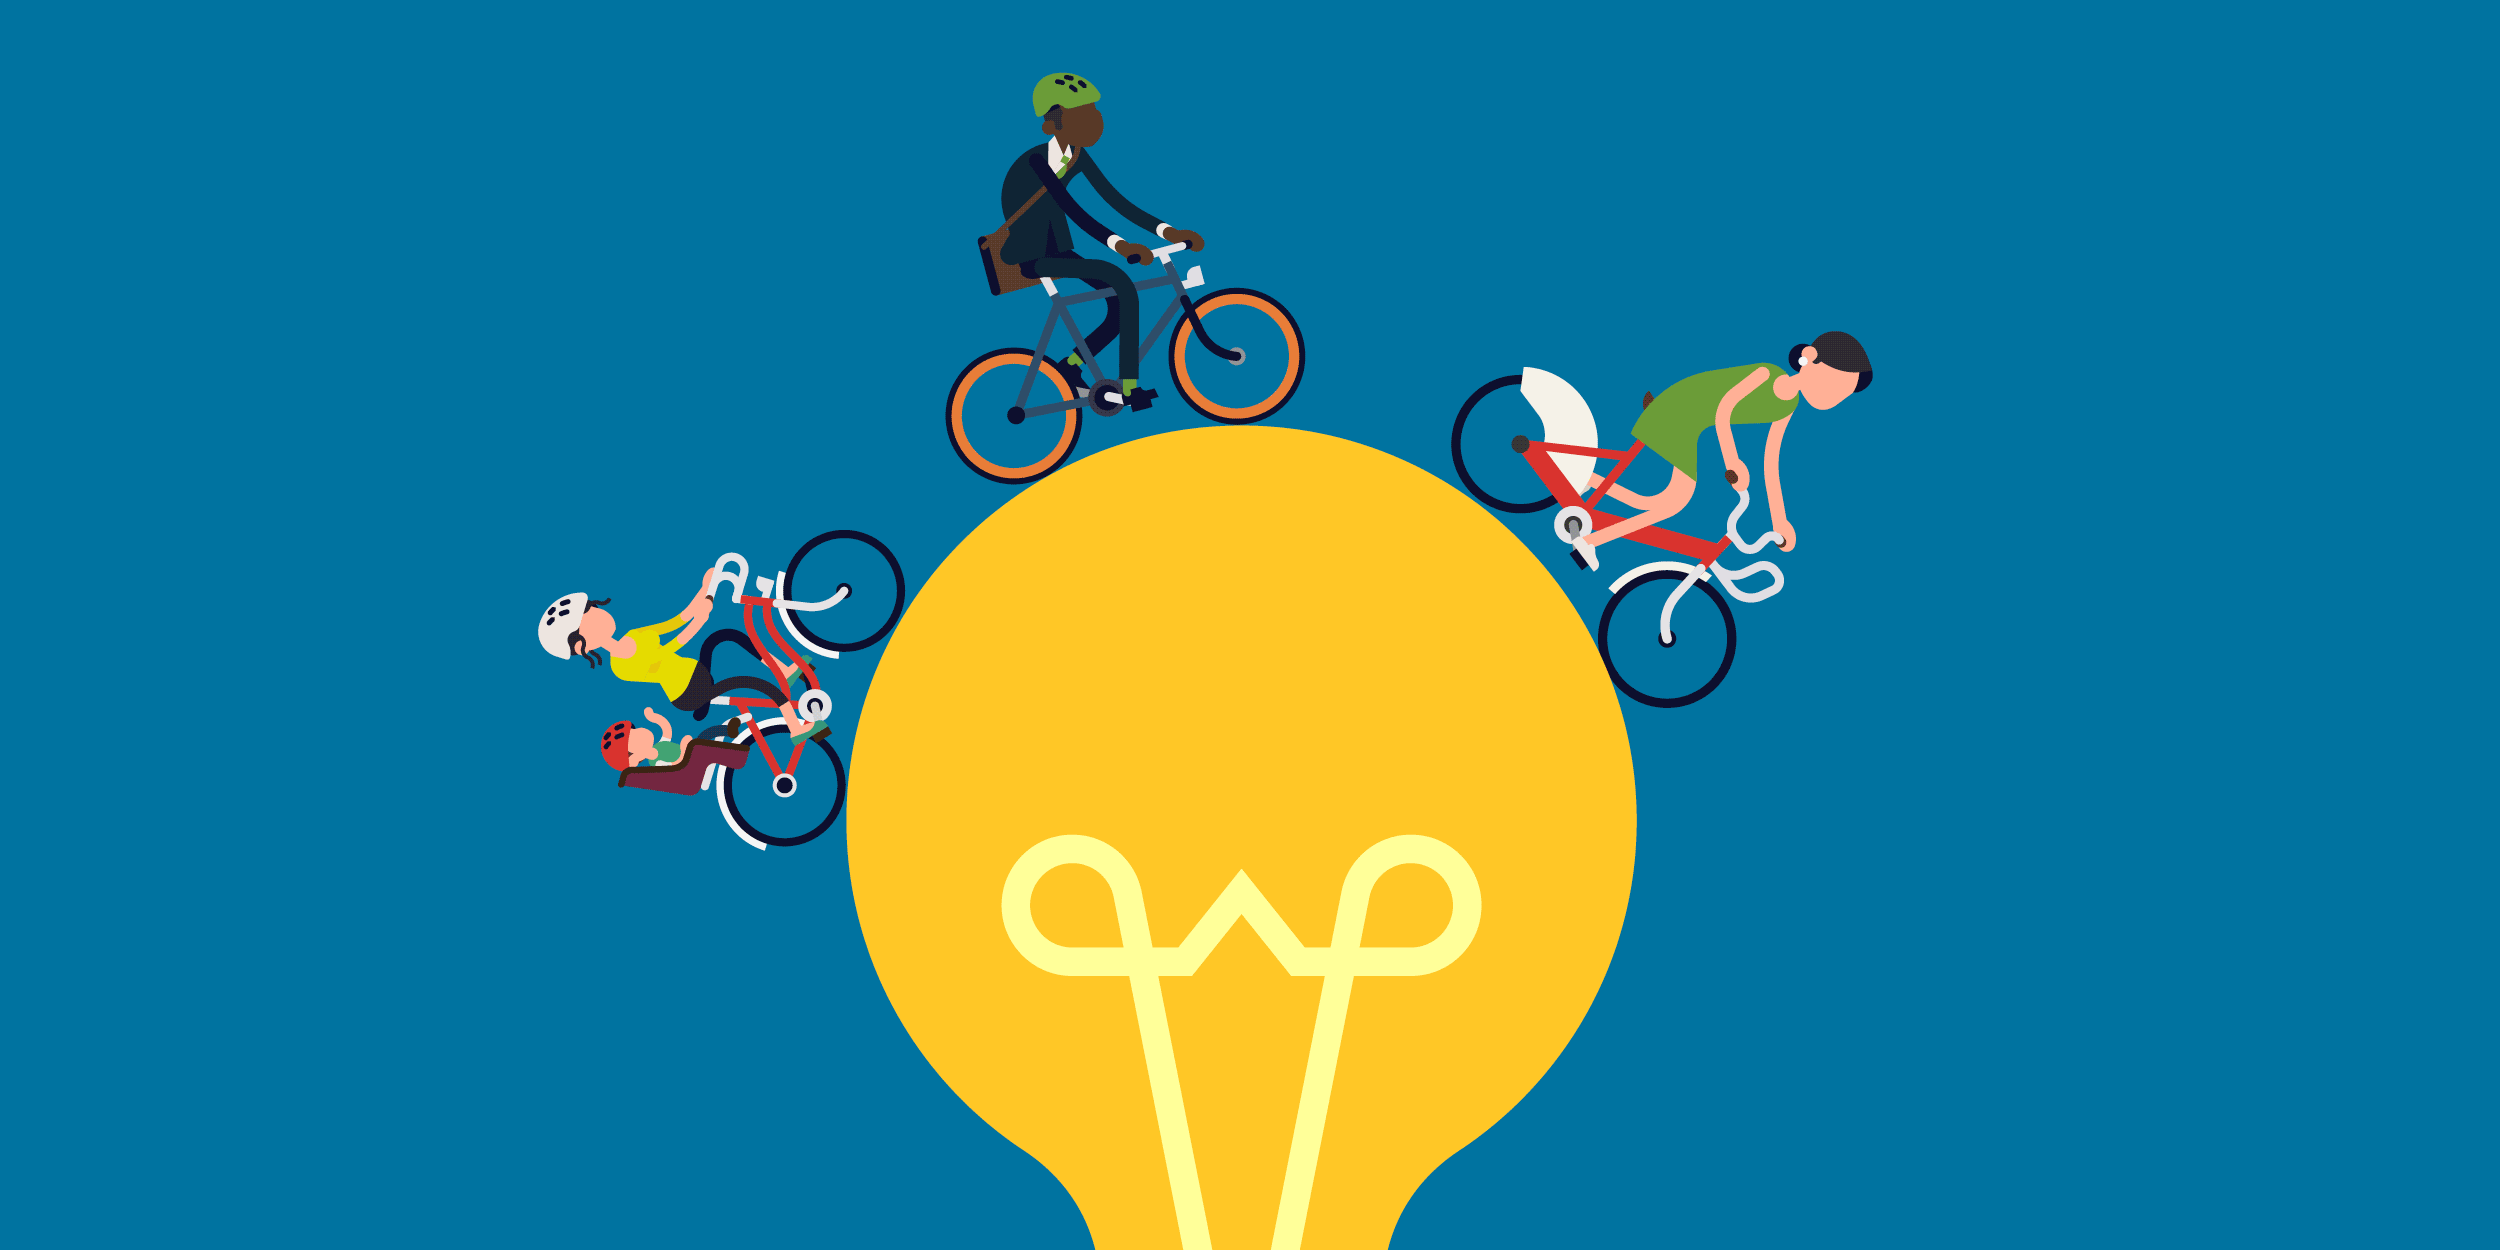 an illustration of a mom, a business person, and another woman riding bicycles on top of a lightbulb, symbolizing B!KE's vision of the bicycle as a tool for personal empowerment